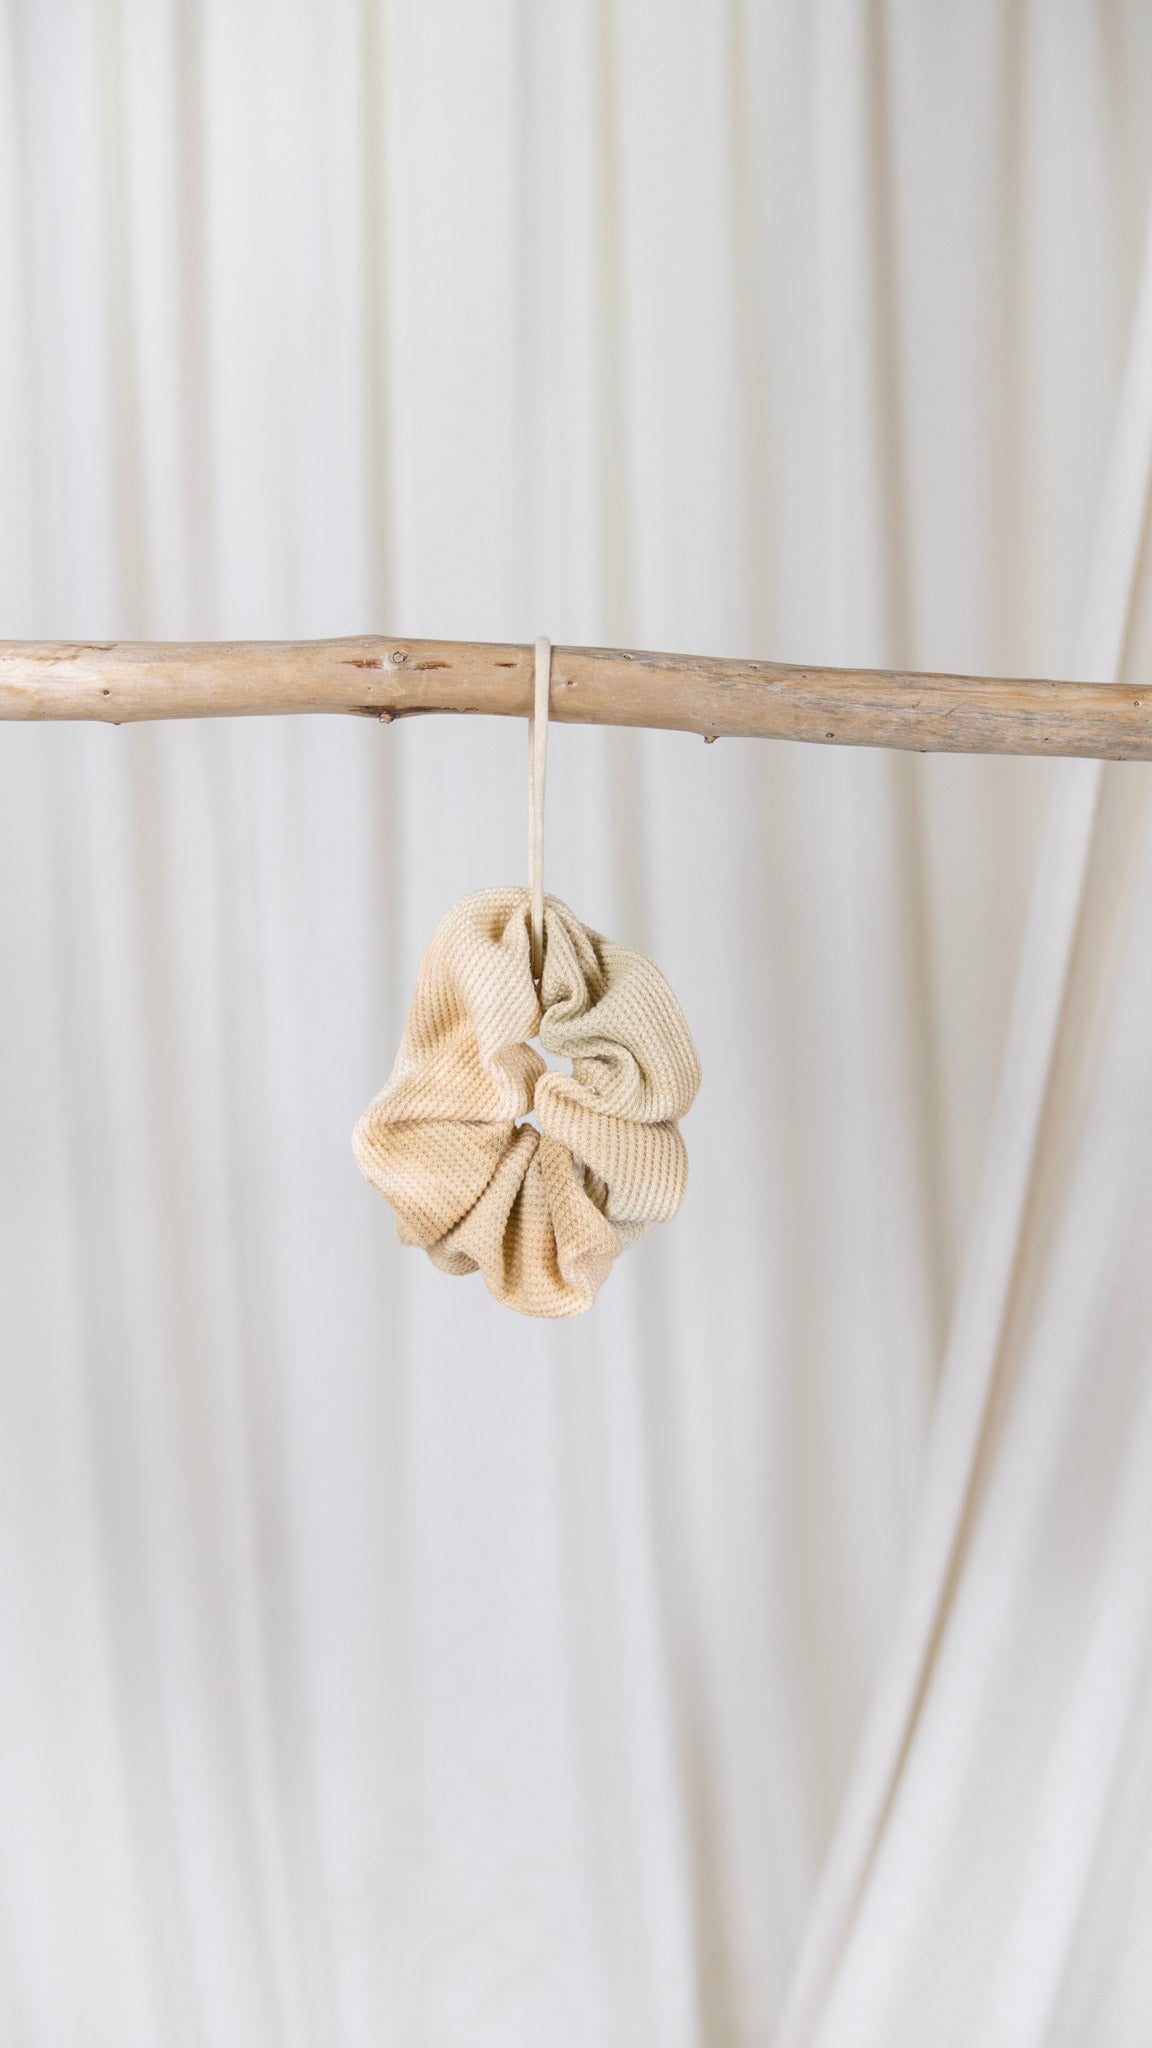 One tan and cream dyed oversized thermal scrunchie hanging from a piece of driftwood